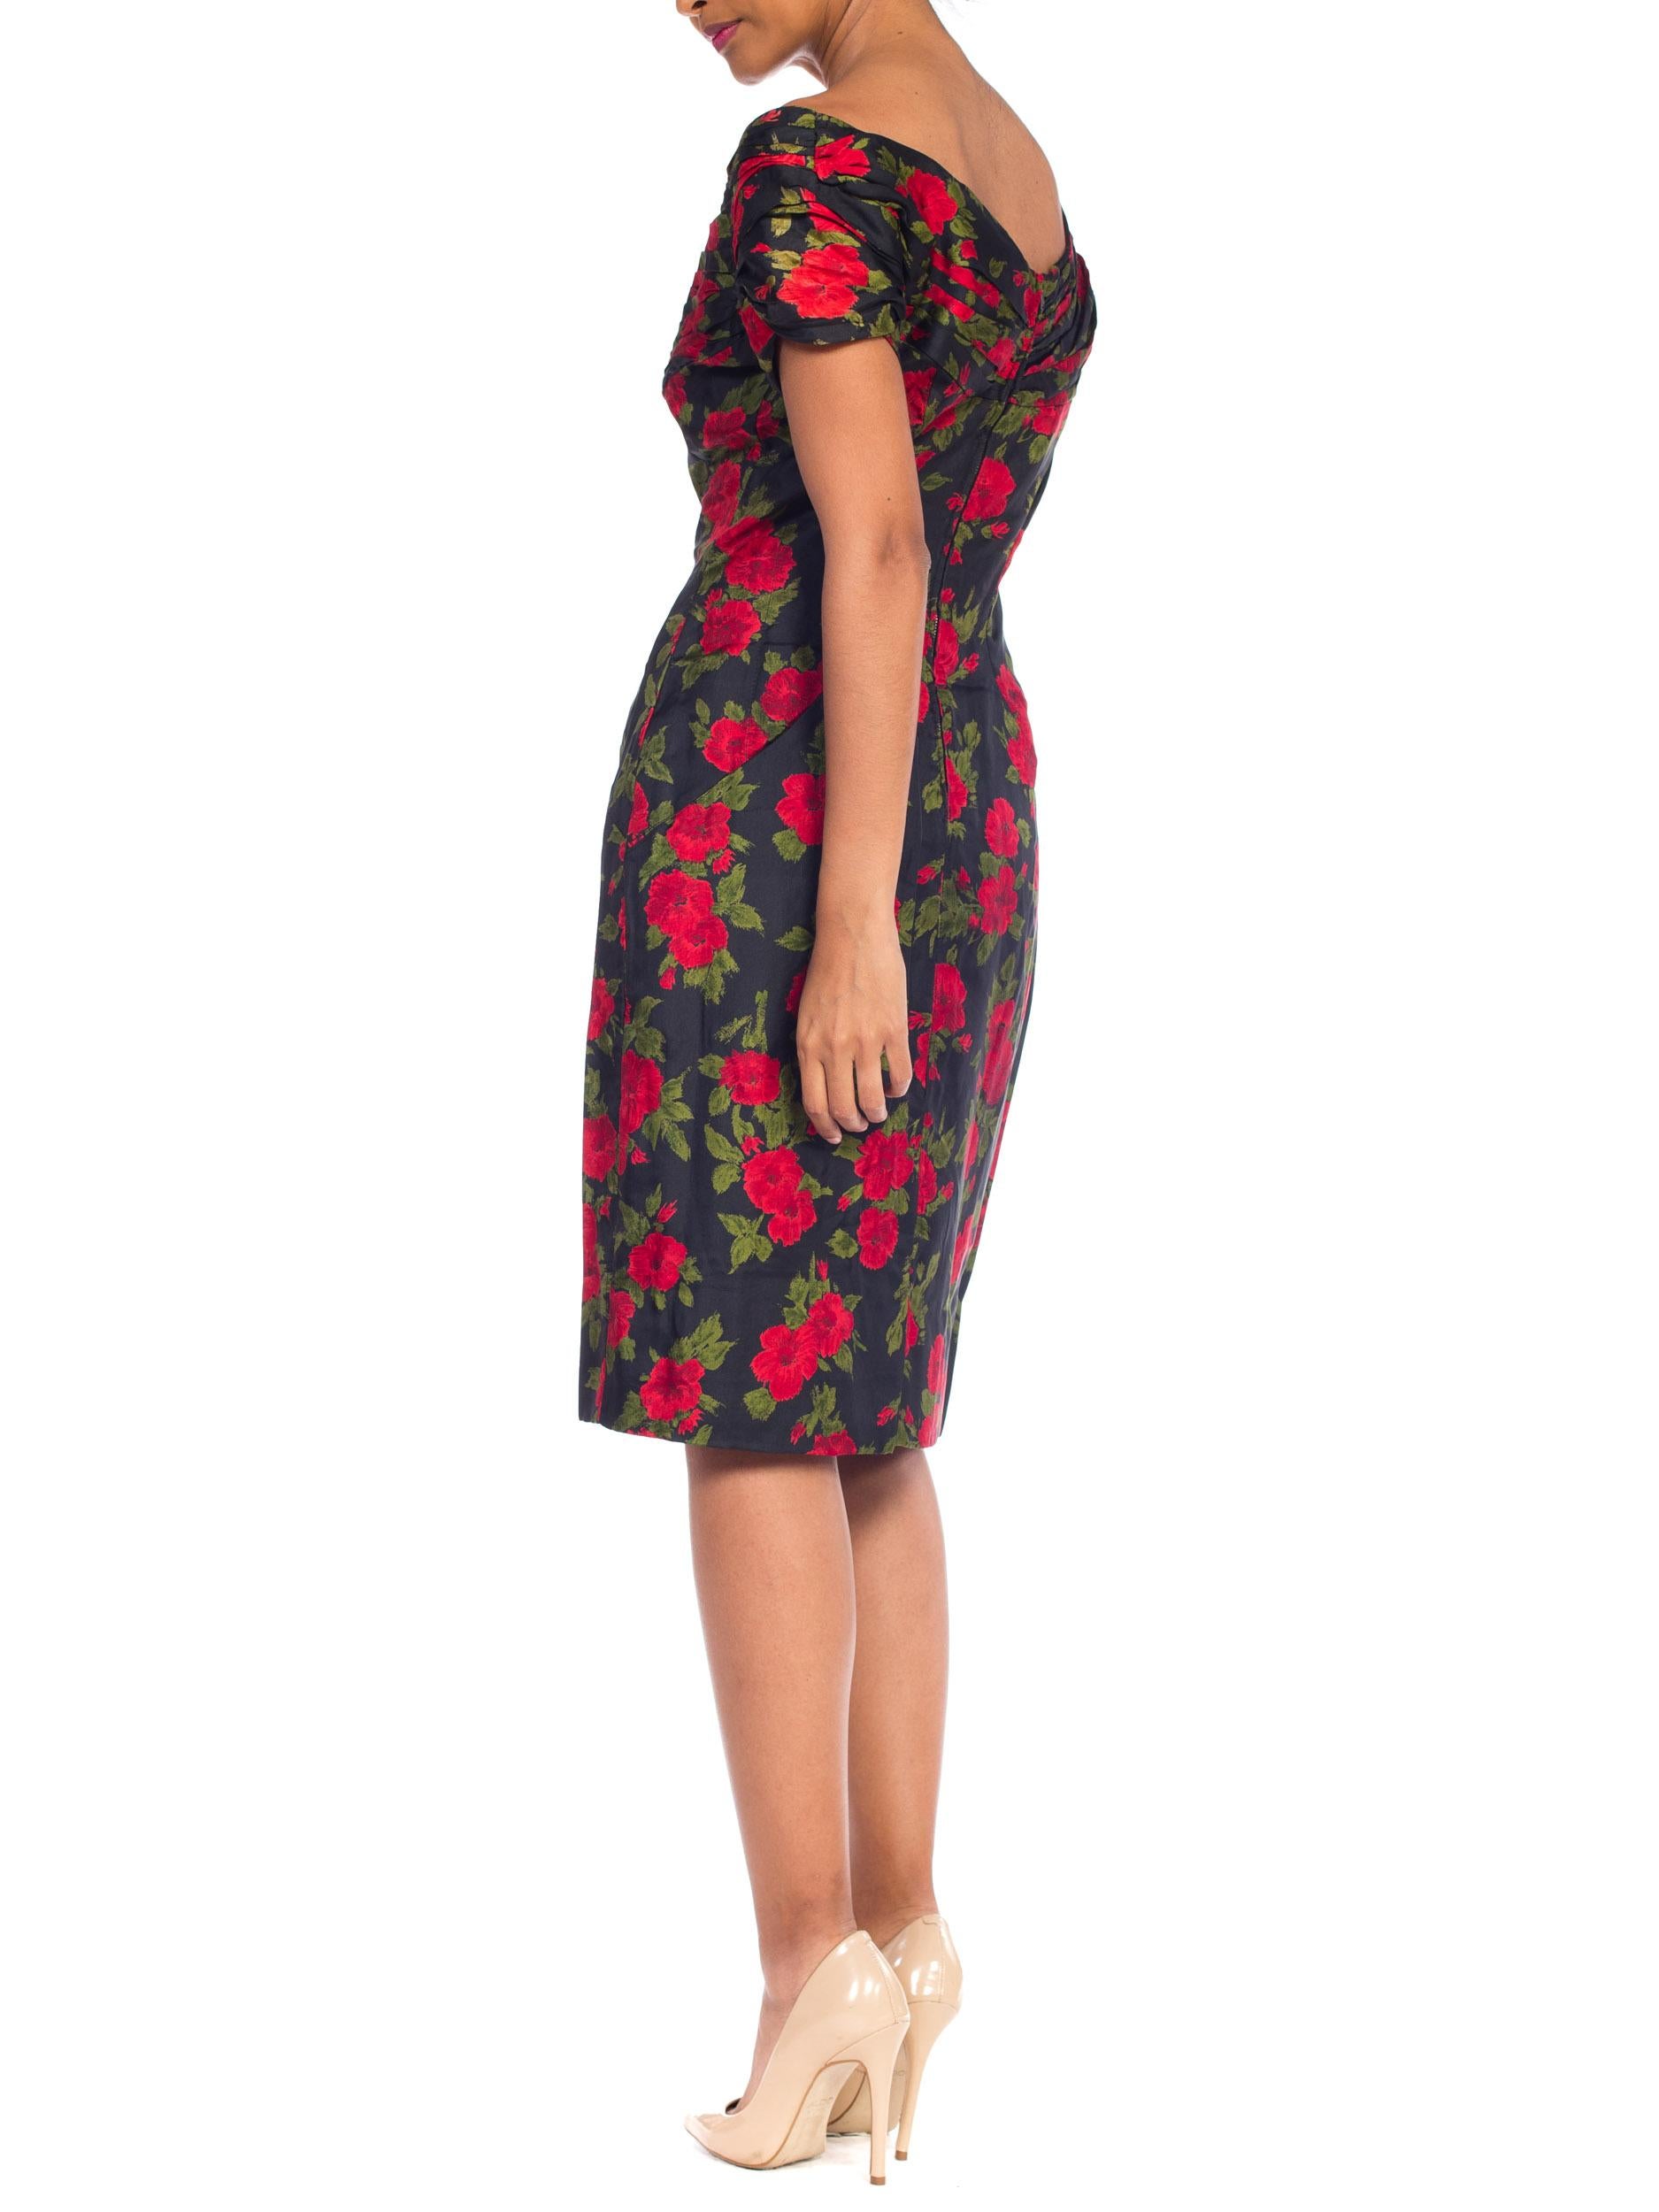 1950S DOLCE & GABBANA Style Silk Twill Red Black Classic Rose Floral Printed Dr For Sale 4